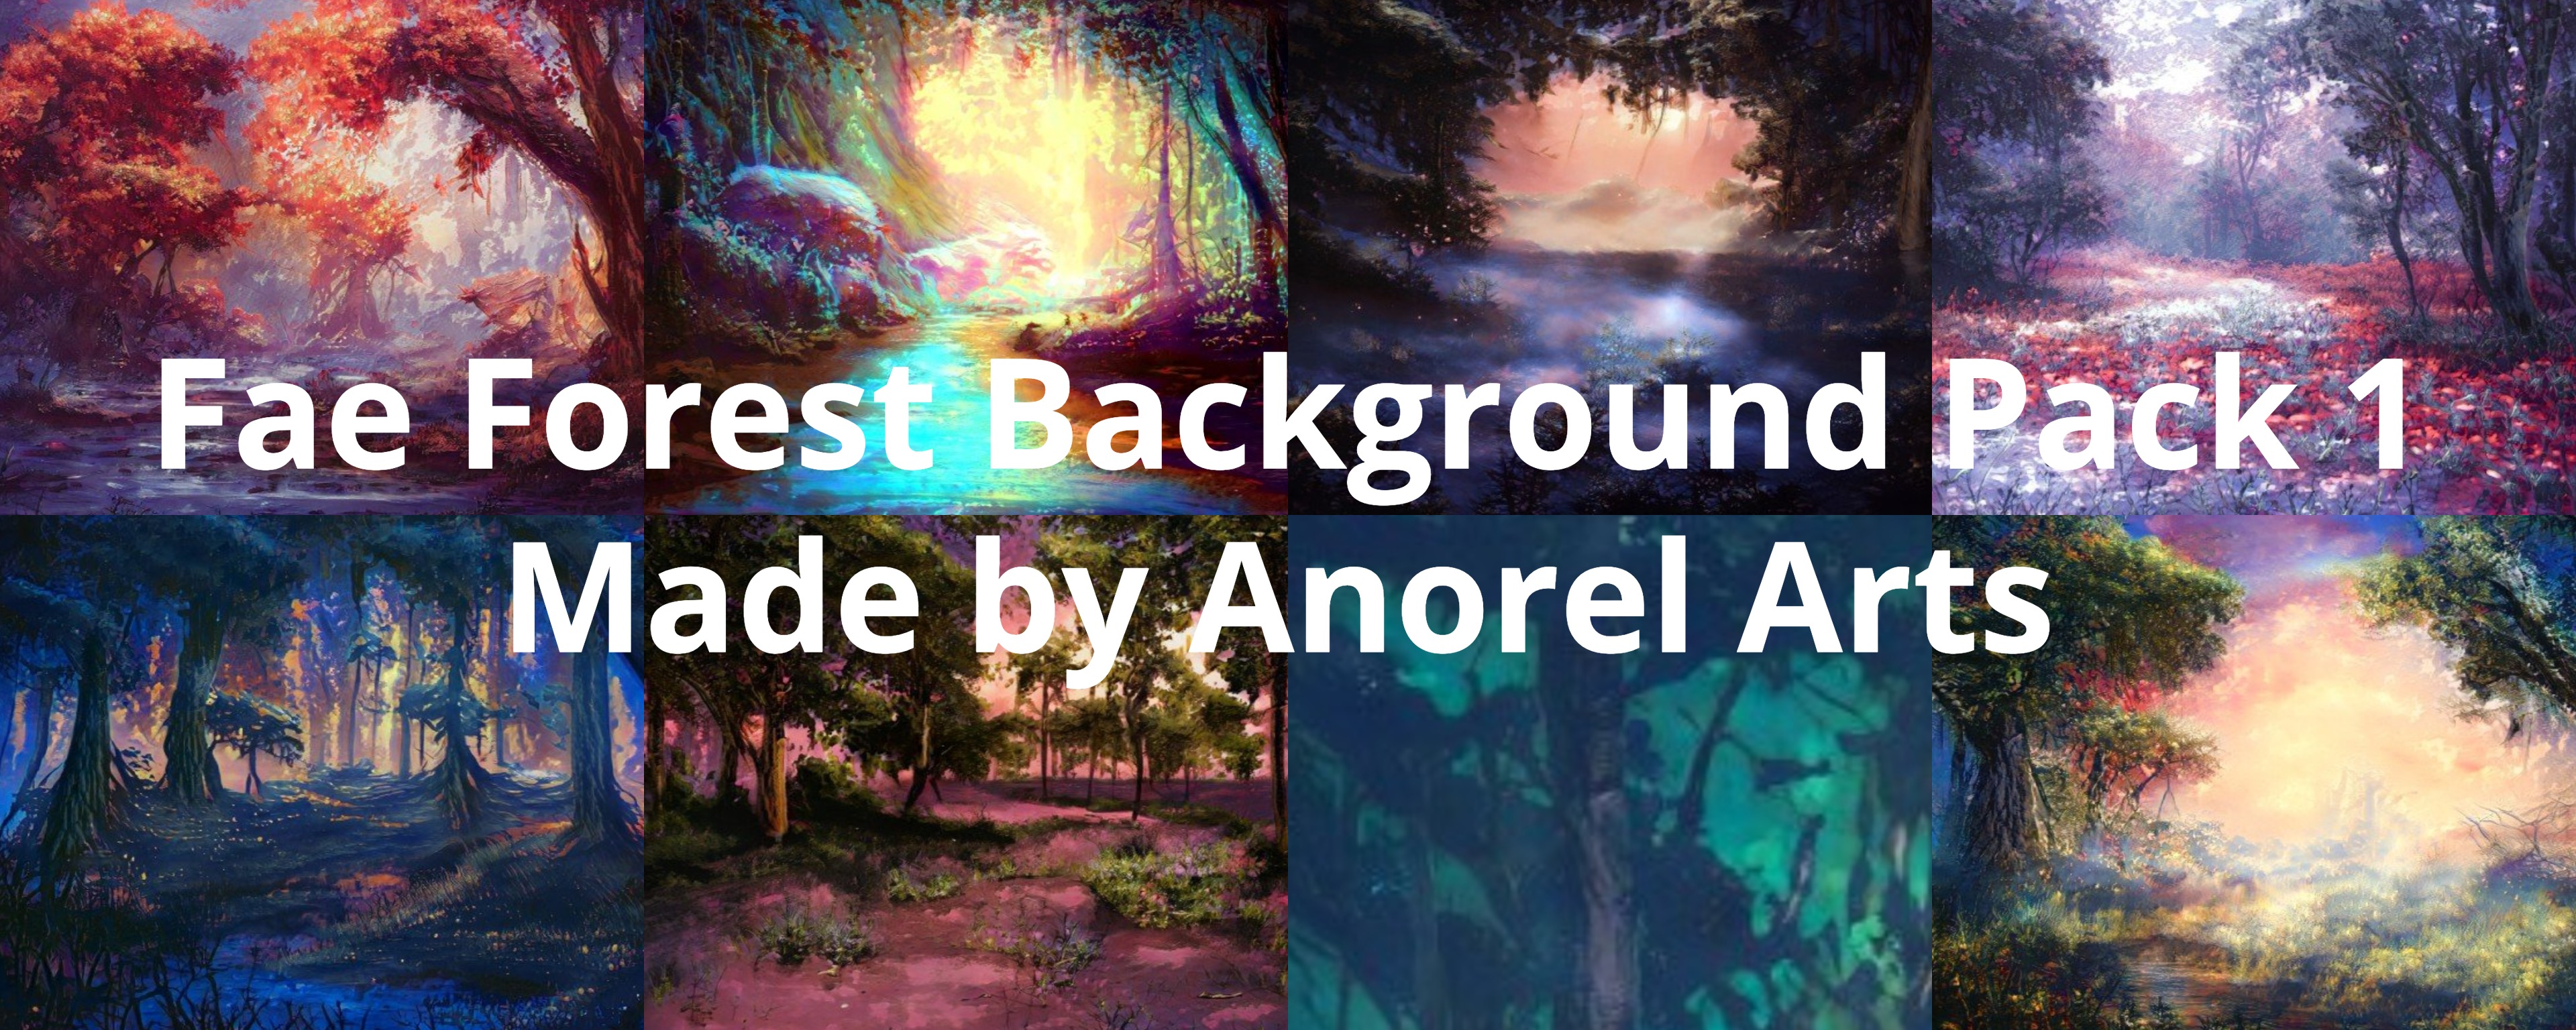 Fae Forest Background Pack 1